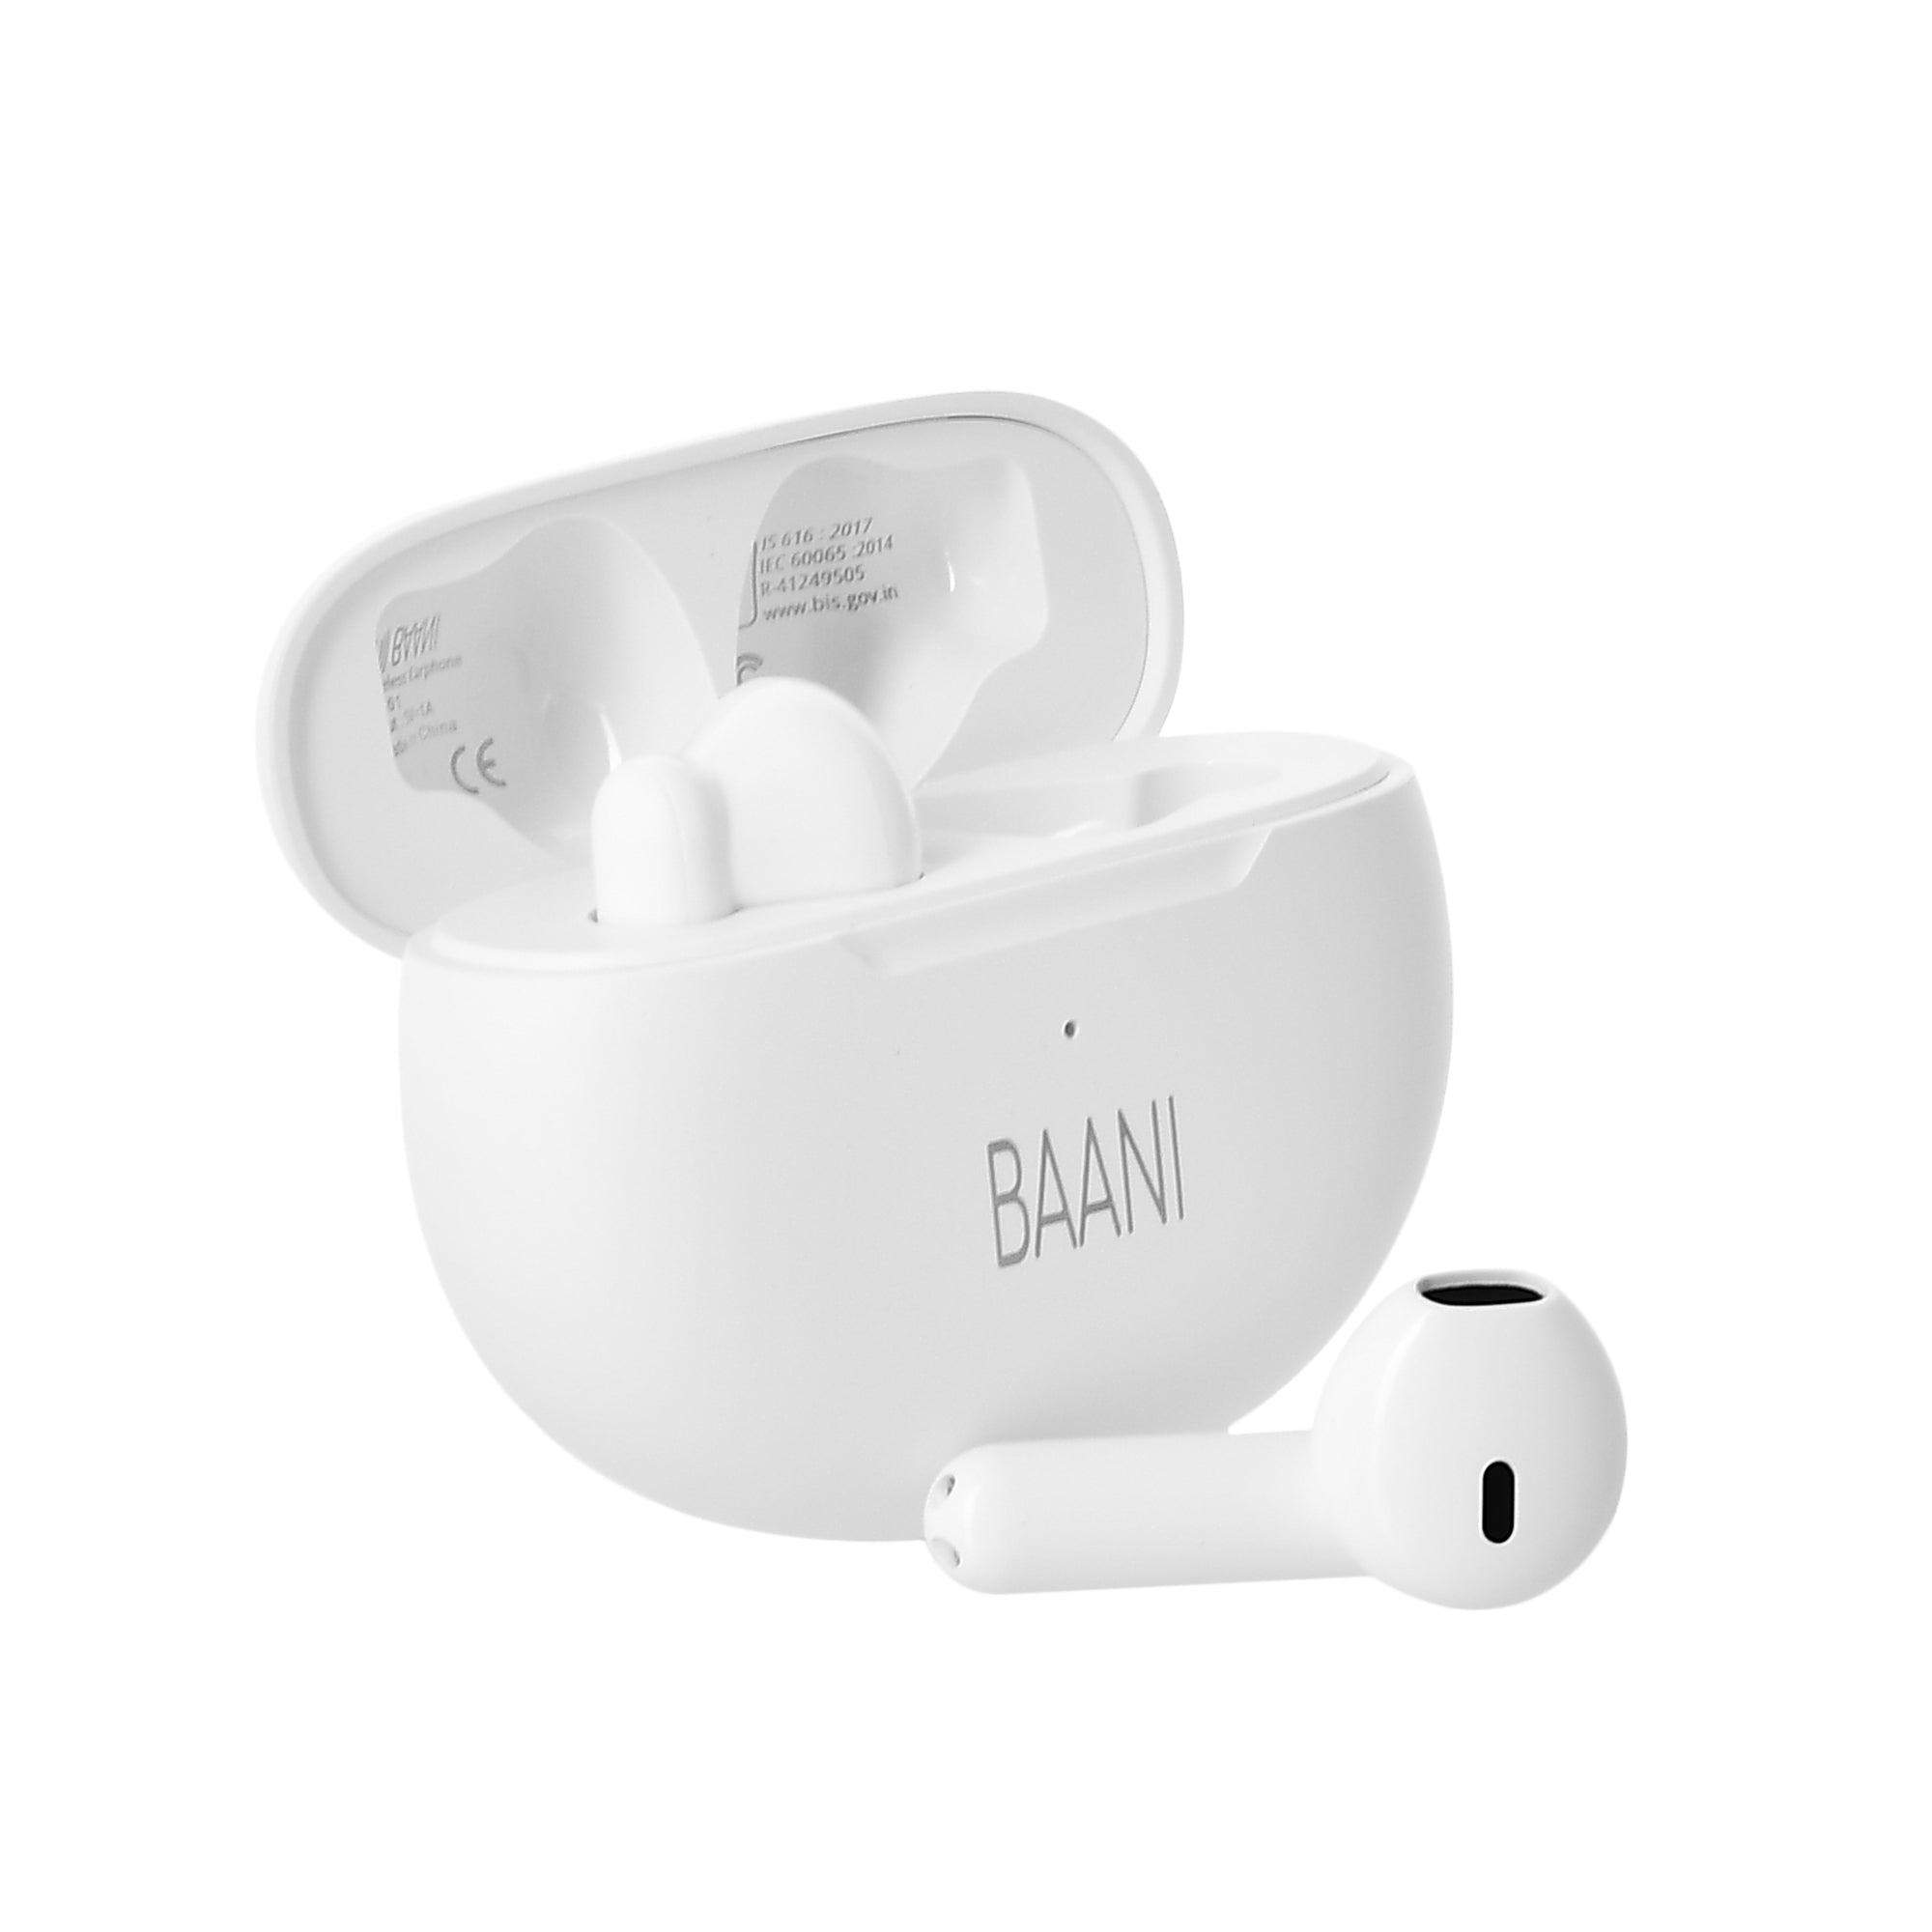 White earbuds case of BT101 Earbuds